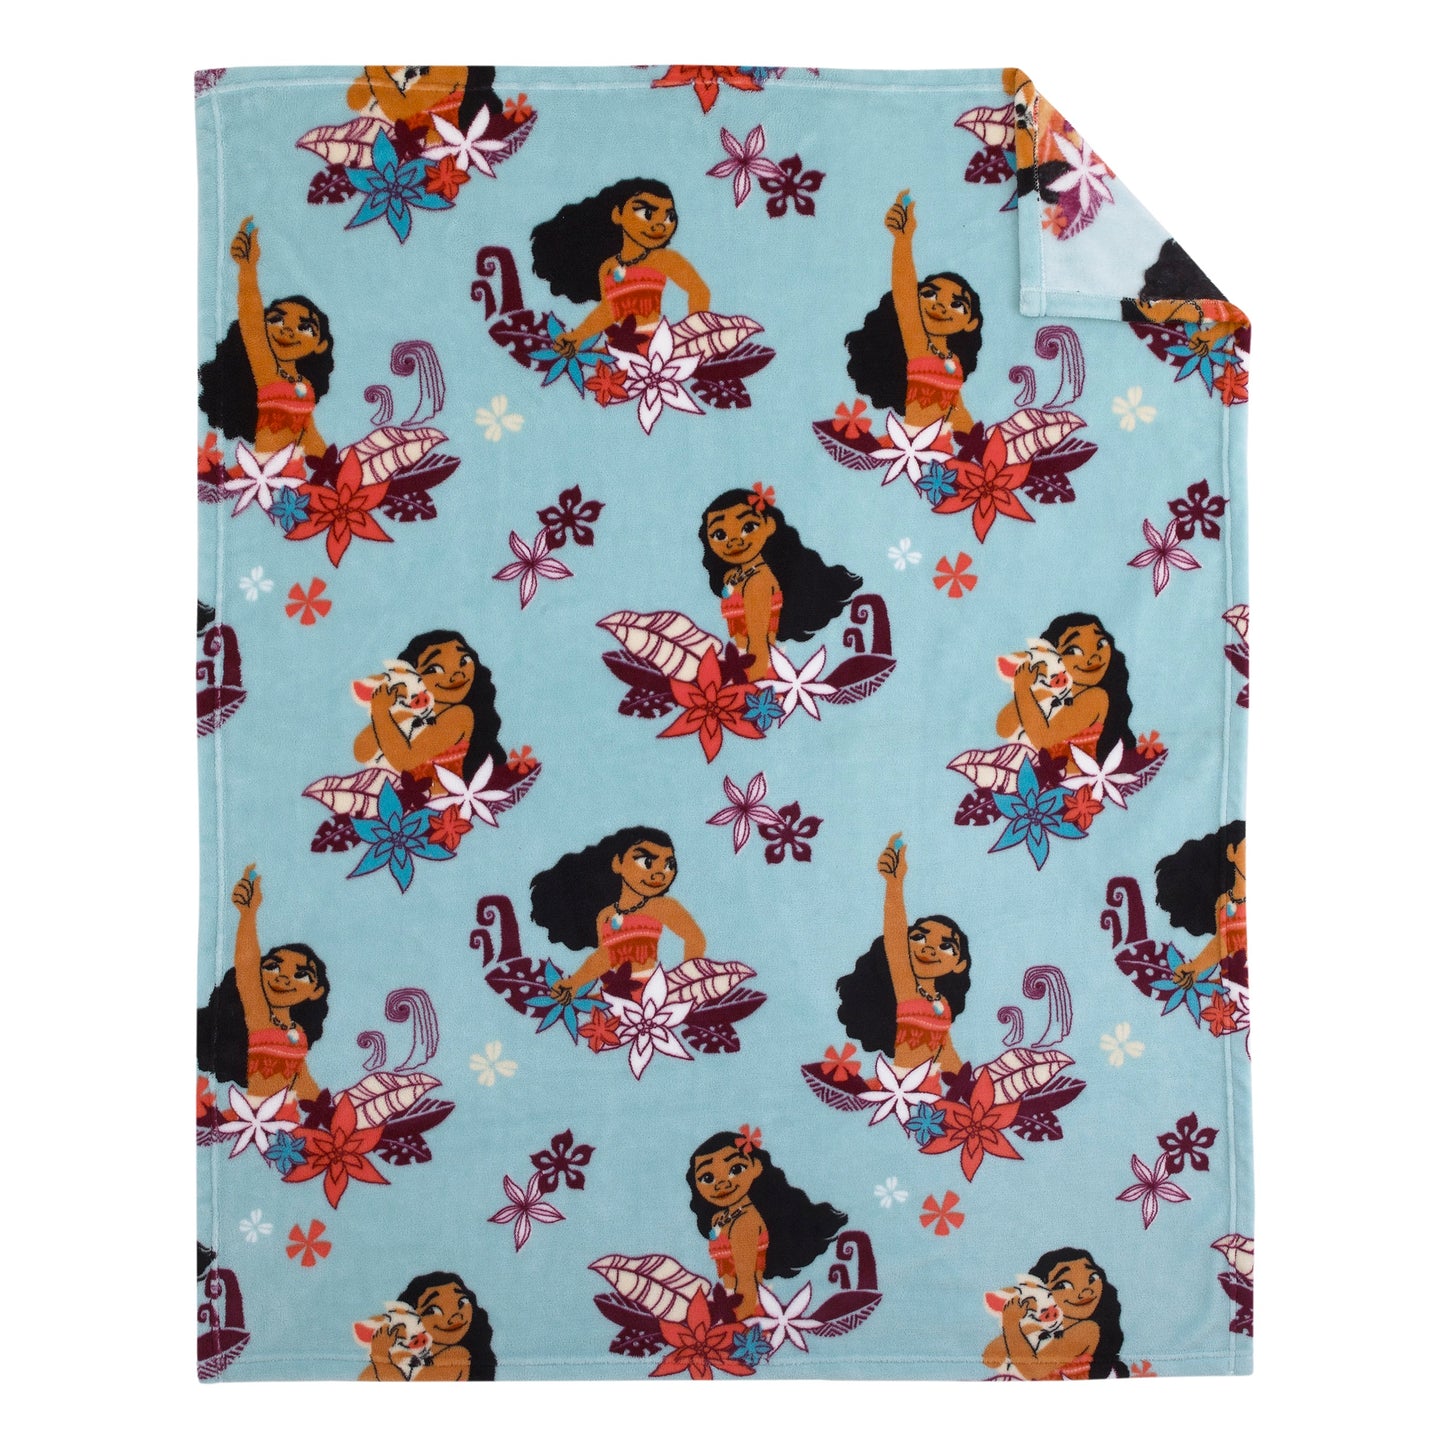 Disney Moana Feel The Waves Aqua, Coral and Violet with Pua Pig and Tropical Flowers Super Soft Toddler Blanket